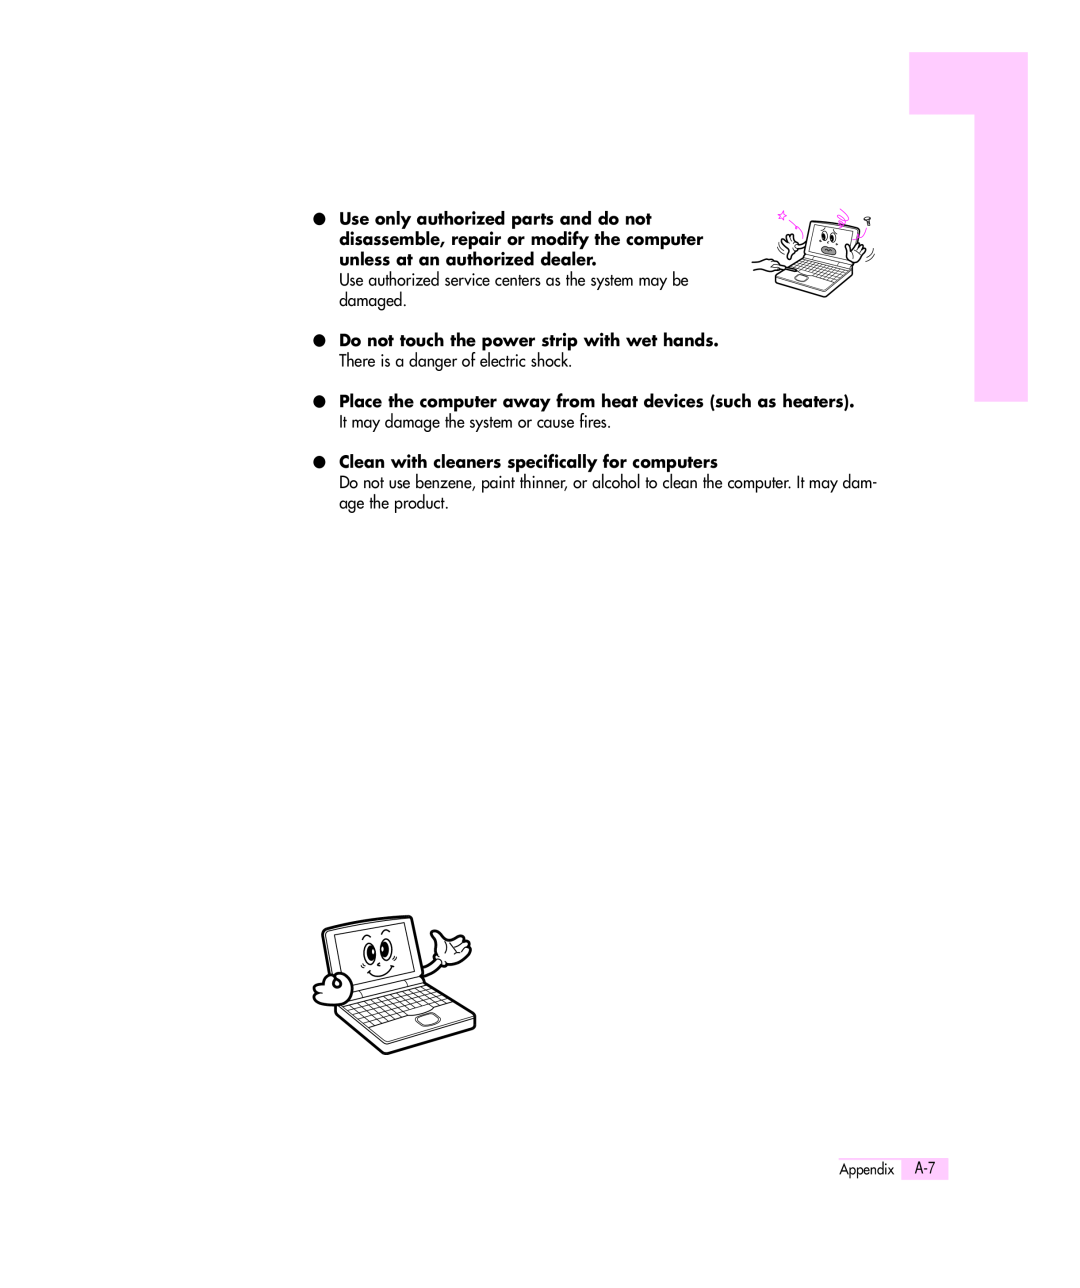 Samsung Q35 manual Clean with cleaners specifically for computers 